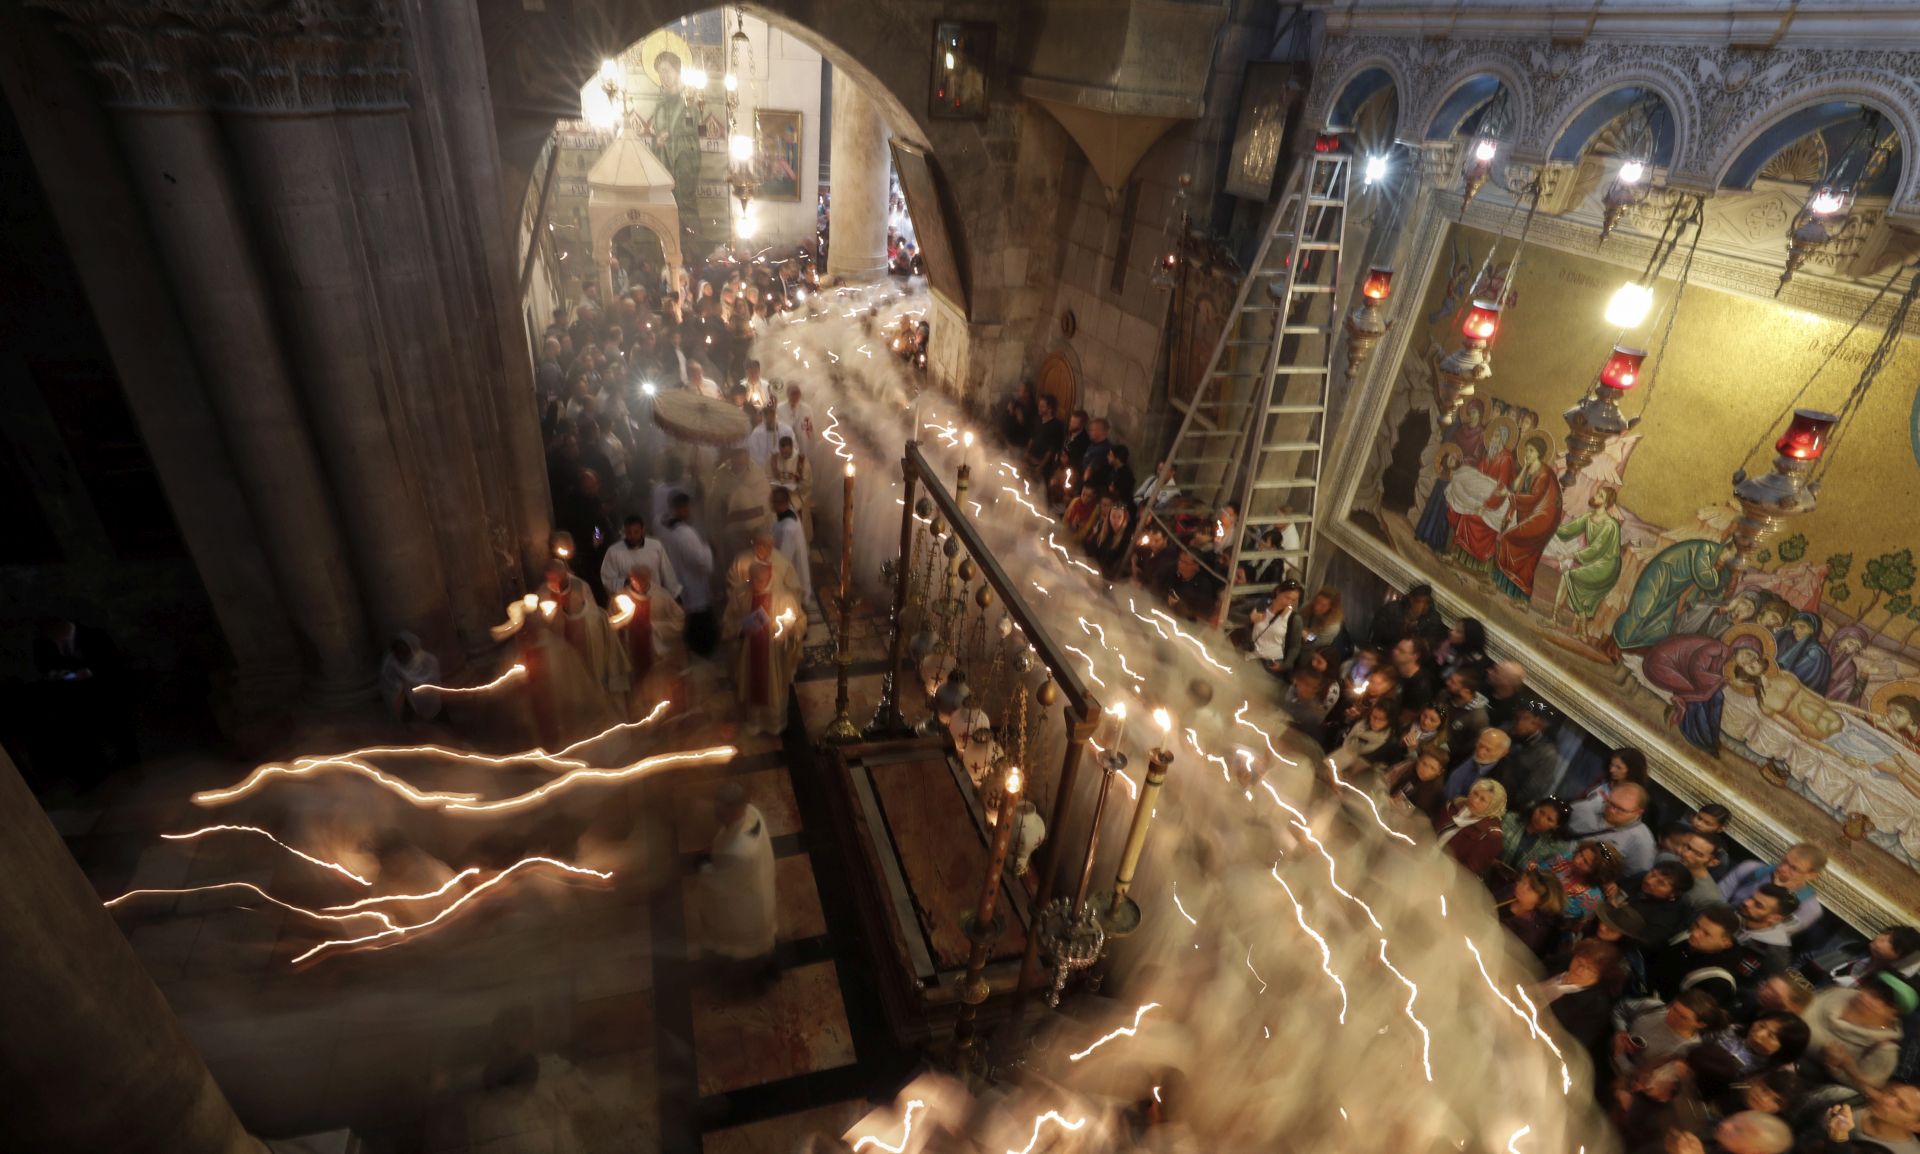 epa07513514 A picture taken with a slow shutter speed effect shows Christian worshippers take part in the procession of the holy Thursday, during the Catholic Washing of the Feet ceremony on Easter Holy Week, at the Church of the Holy Sepulcher in Jerusalem's old city, 18 April 2019.  EPA/ATEF SAFADI